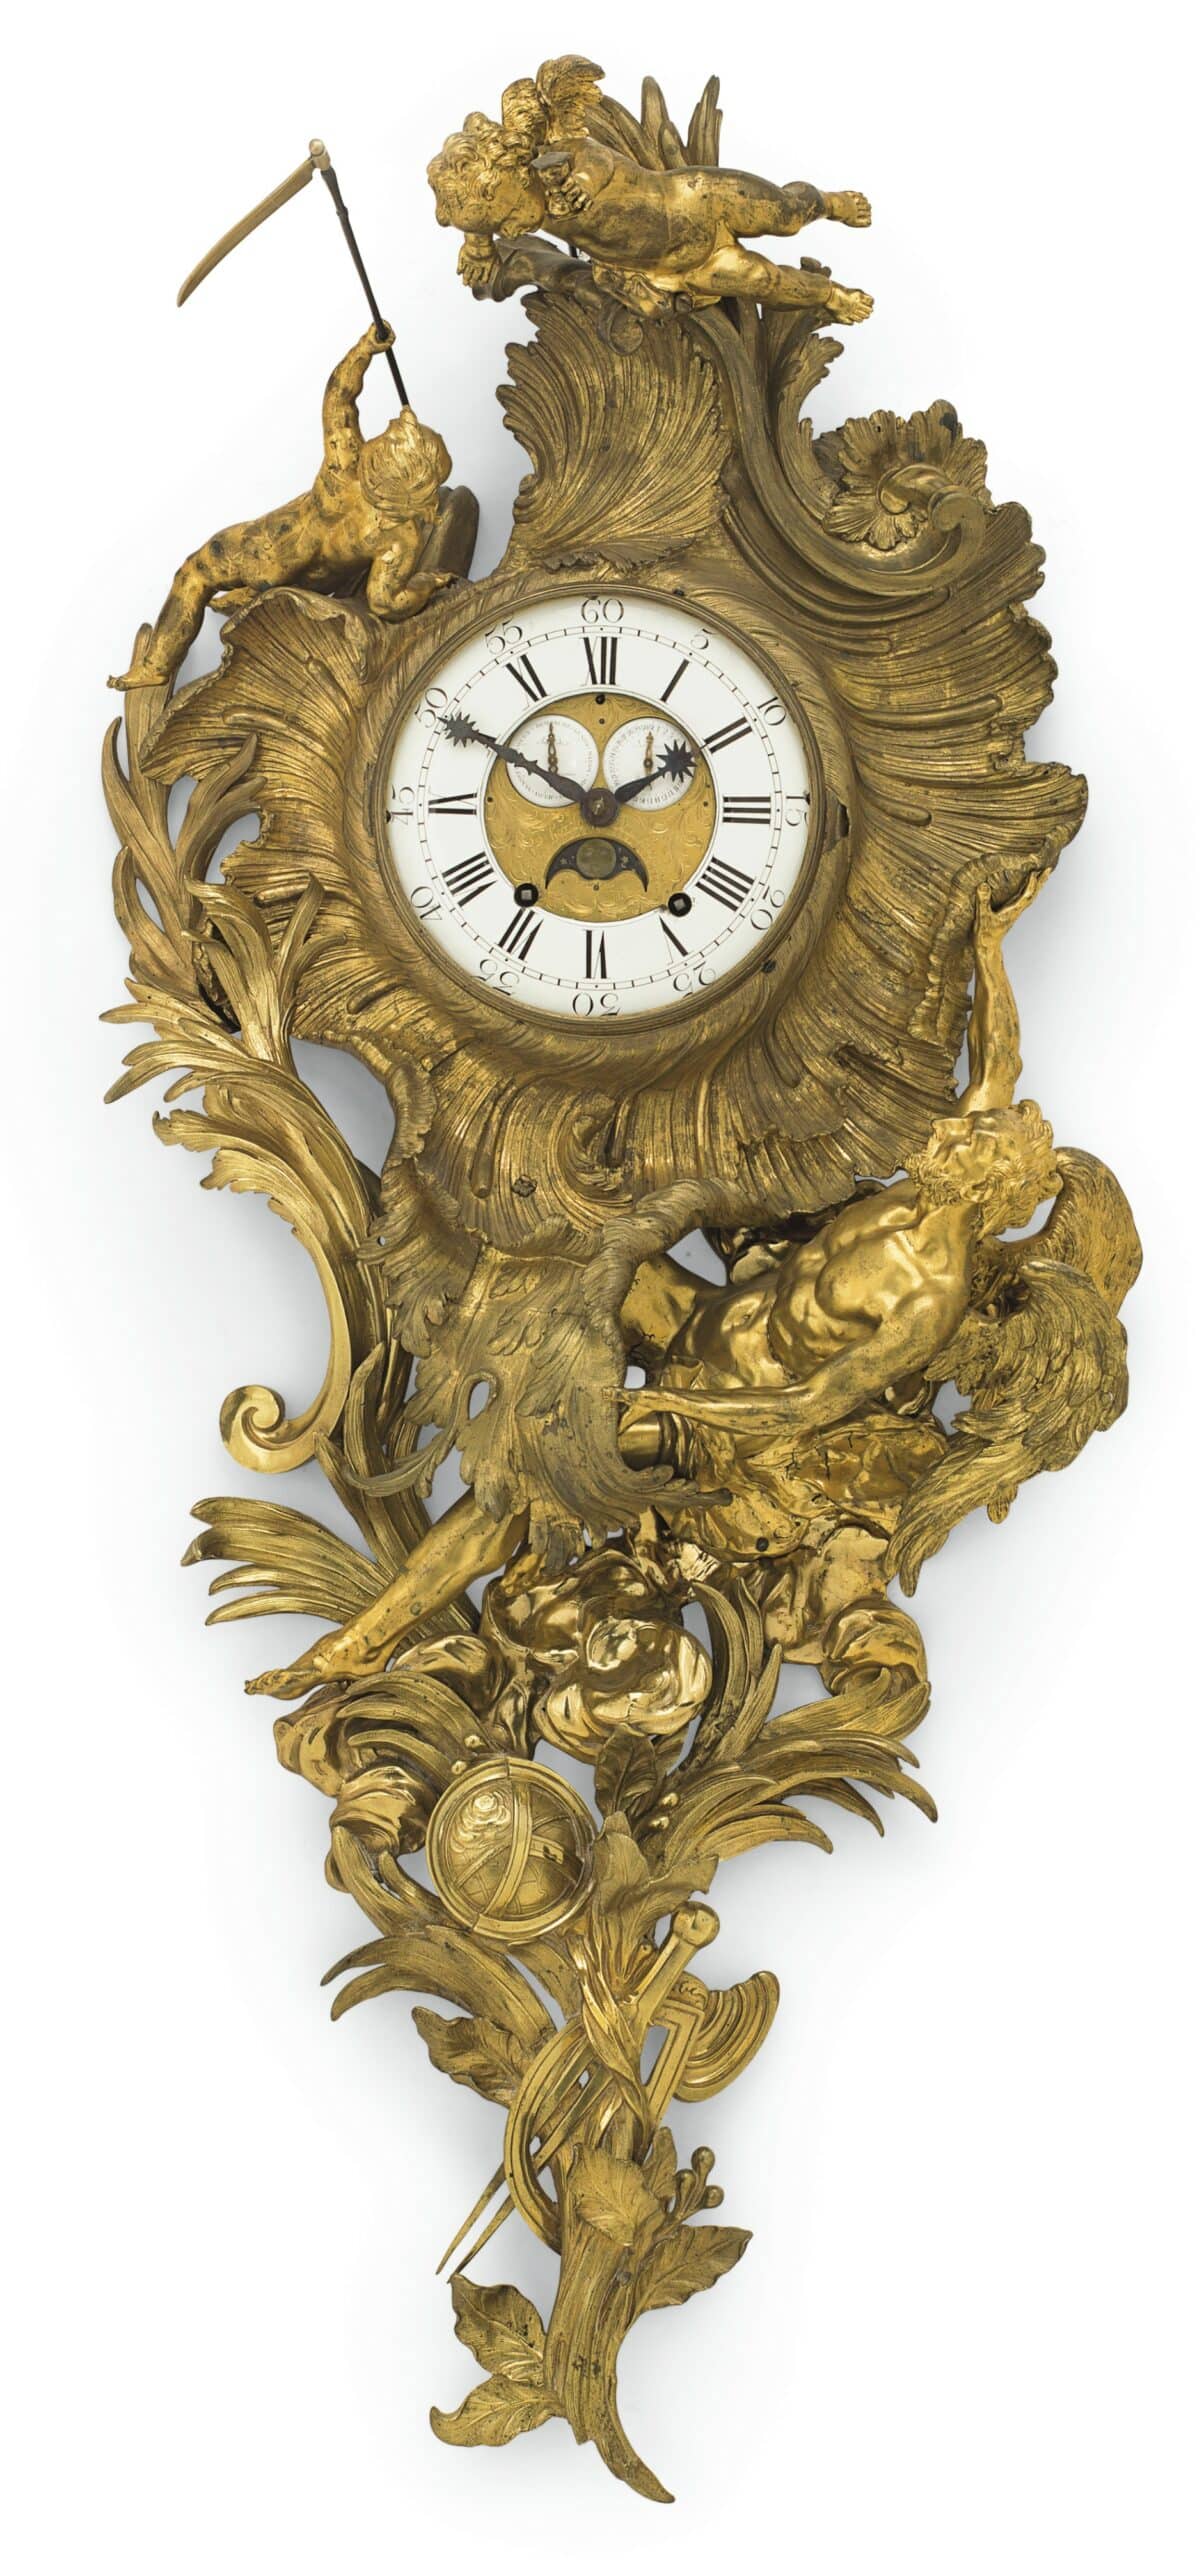 a decorative gold wall clock with sculpted figures around it